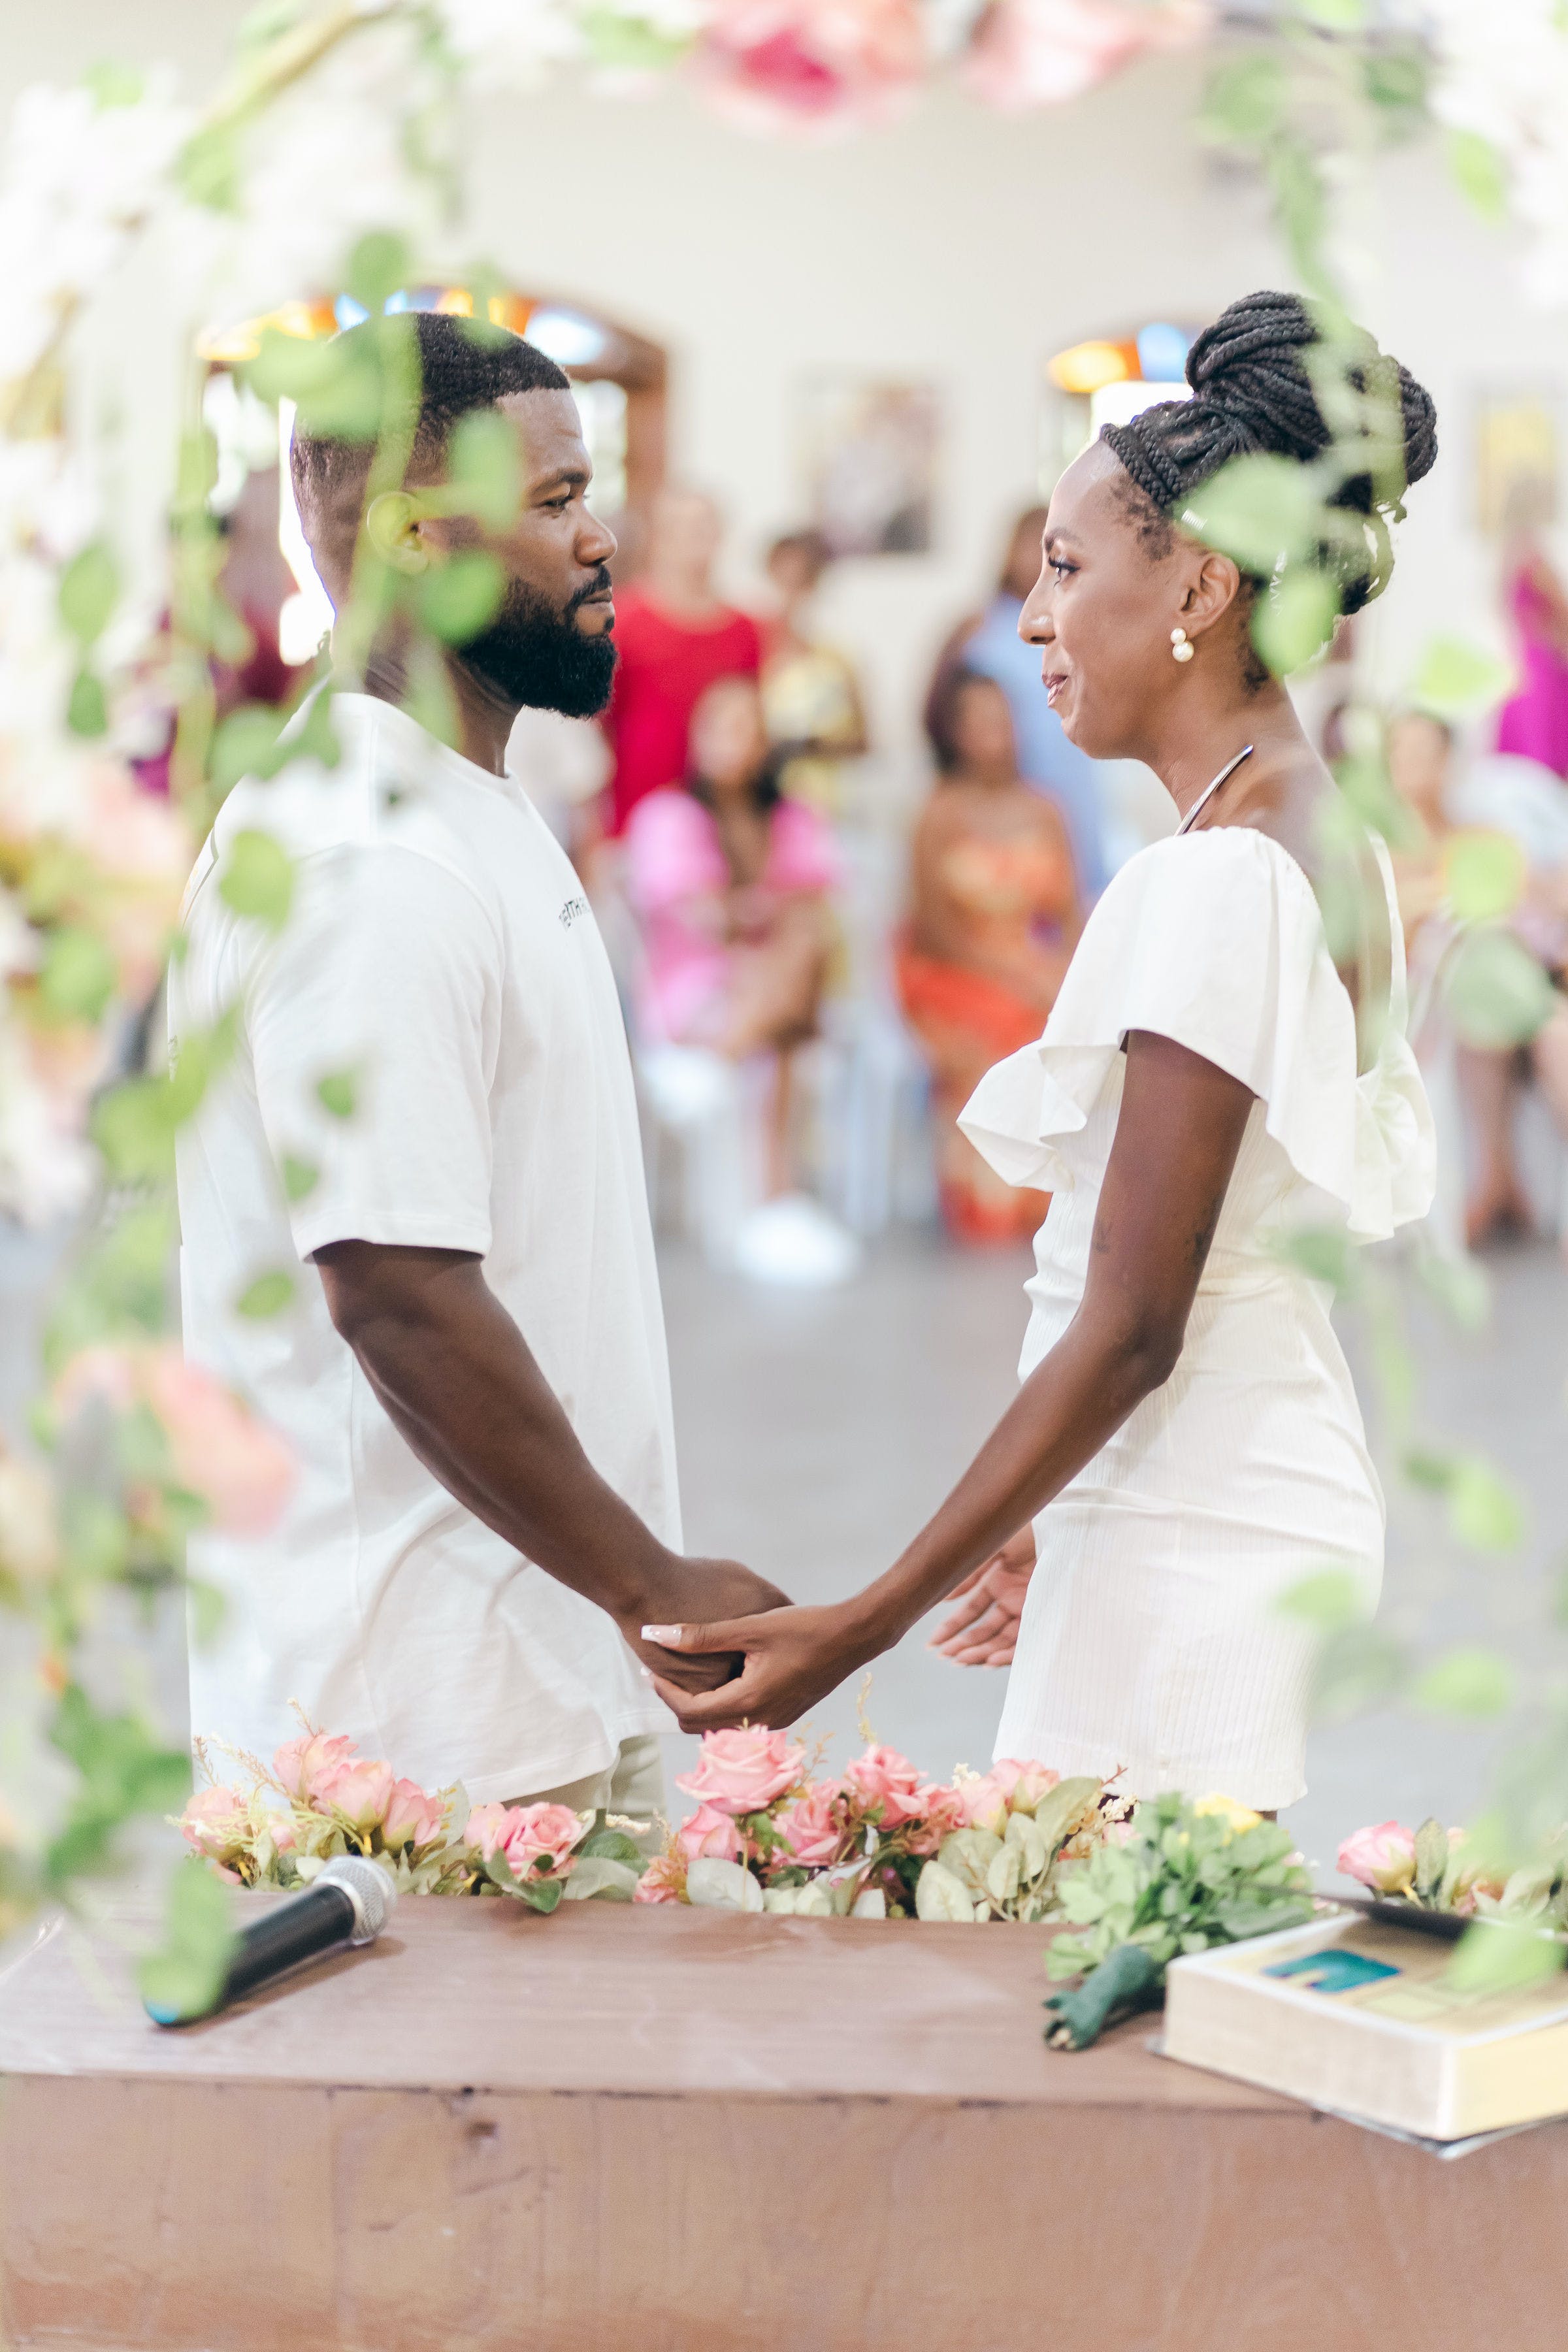 A couple about to get married in front of their loved ones | Source: Pexels